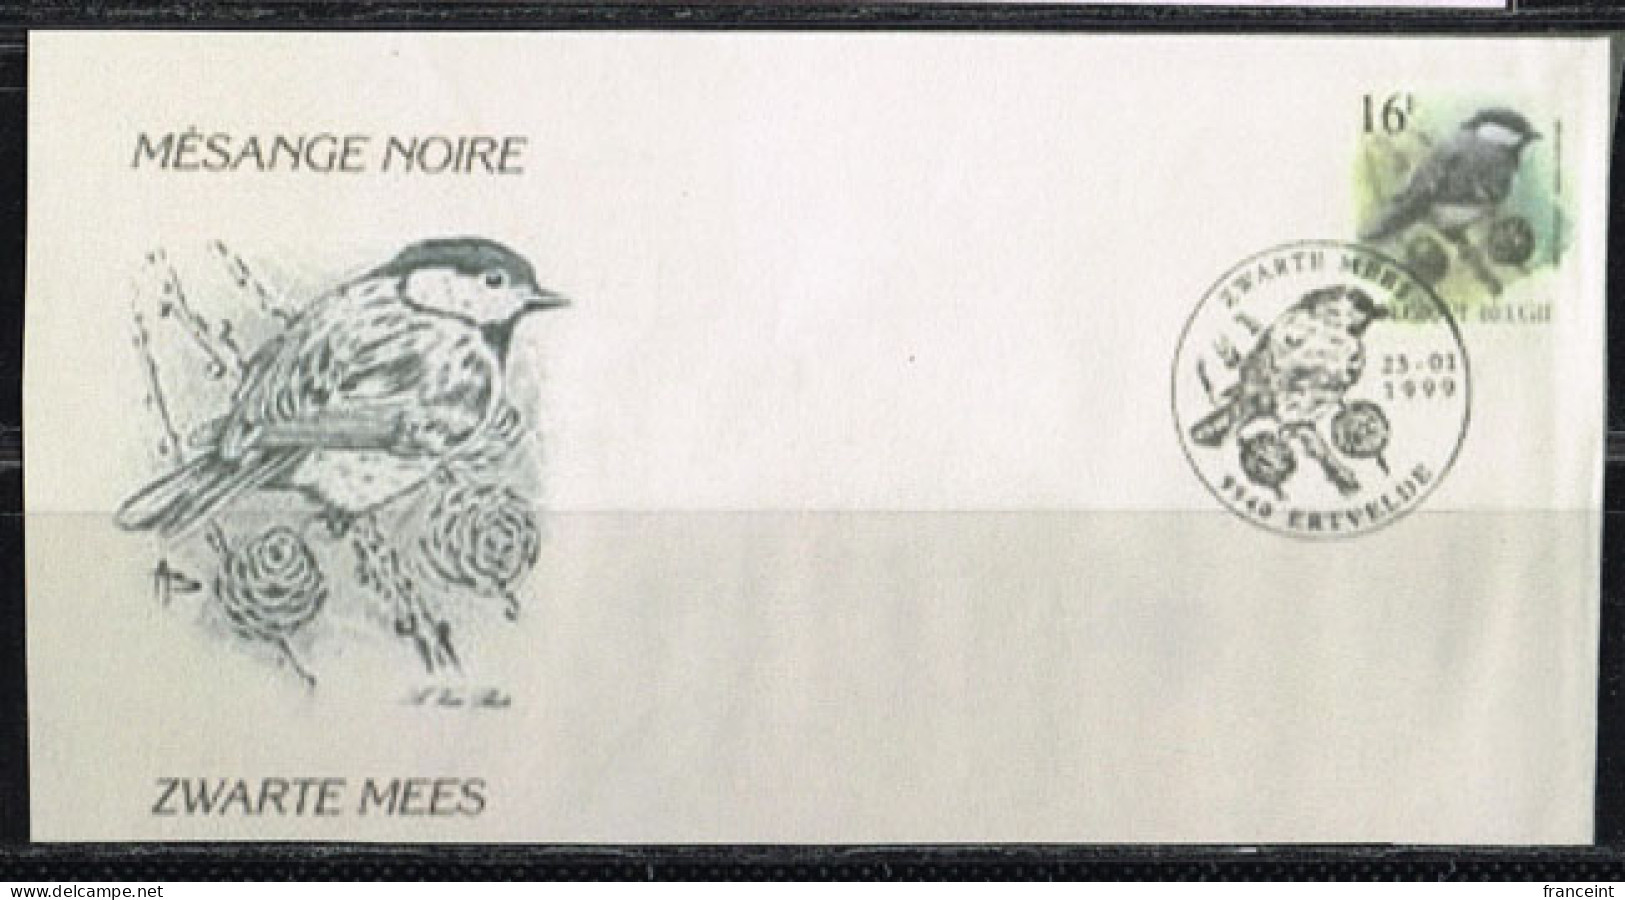 BELGIUM(1991) Coal Tit (Periparus Ater). Die Proof In Black Signed By The Engraver, Representing The FDC Cachet. Sc 1216 - Proofs & Reprints